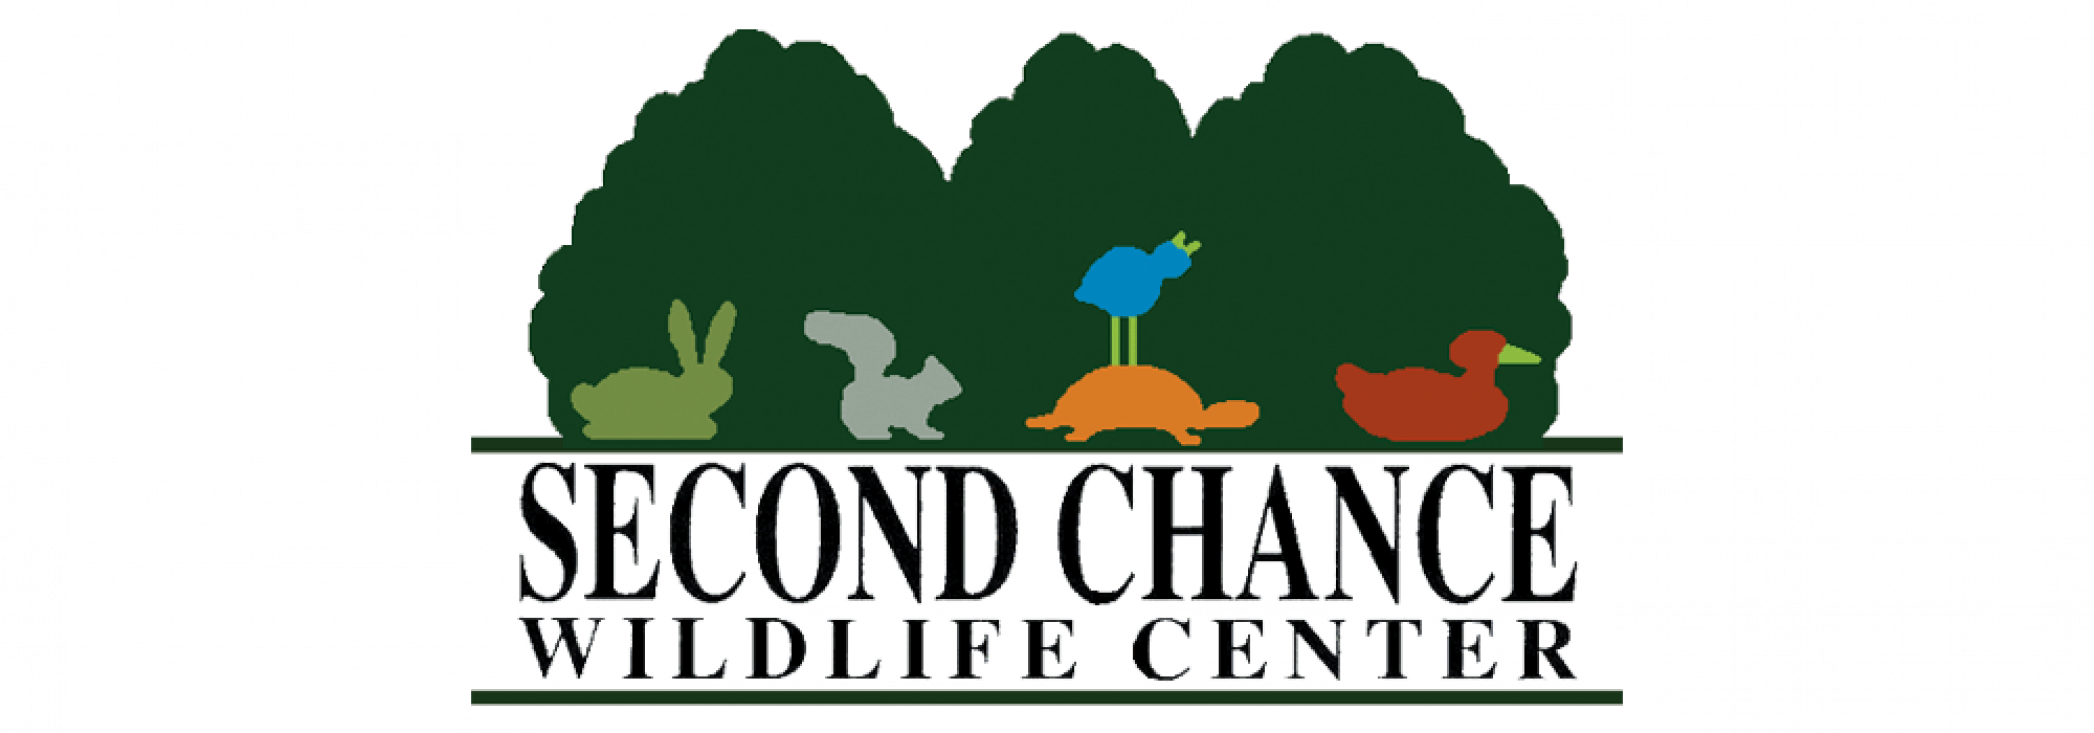 Fundraising clipart bottle drive. Annual second chance wildlife